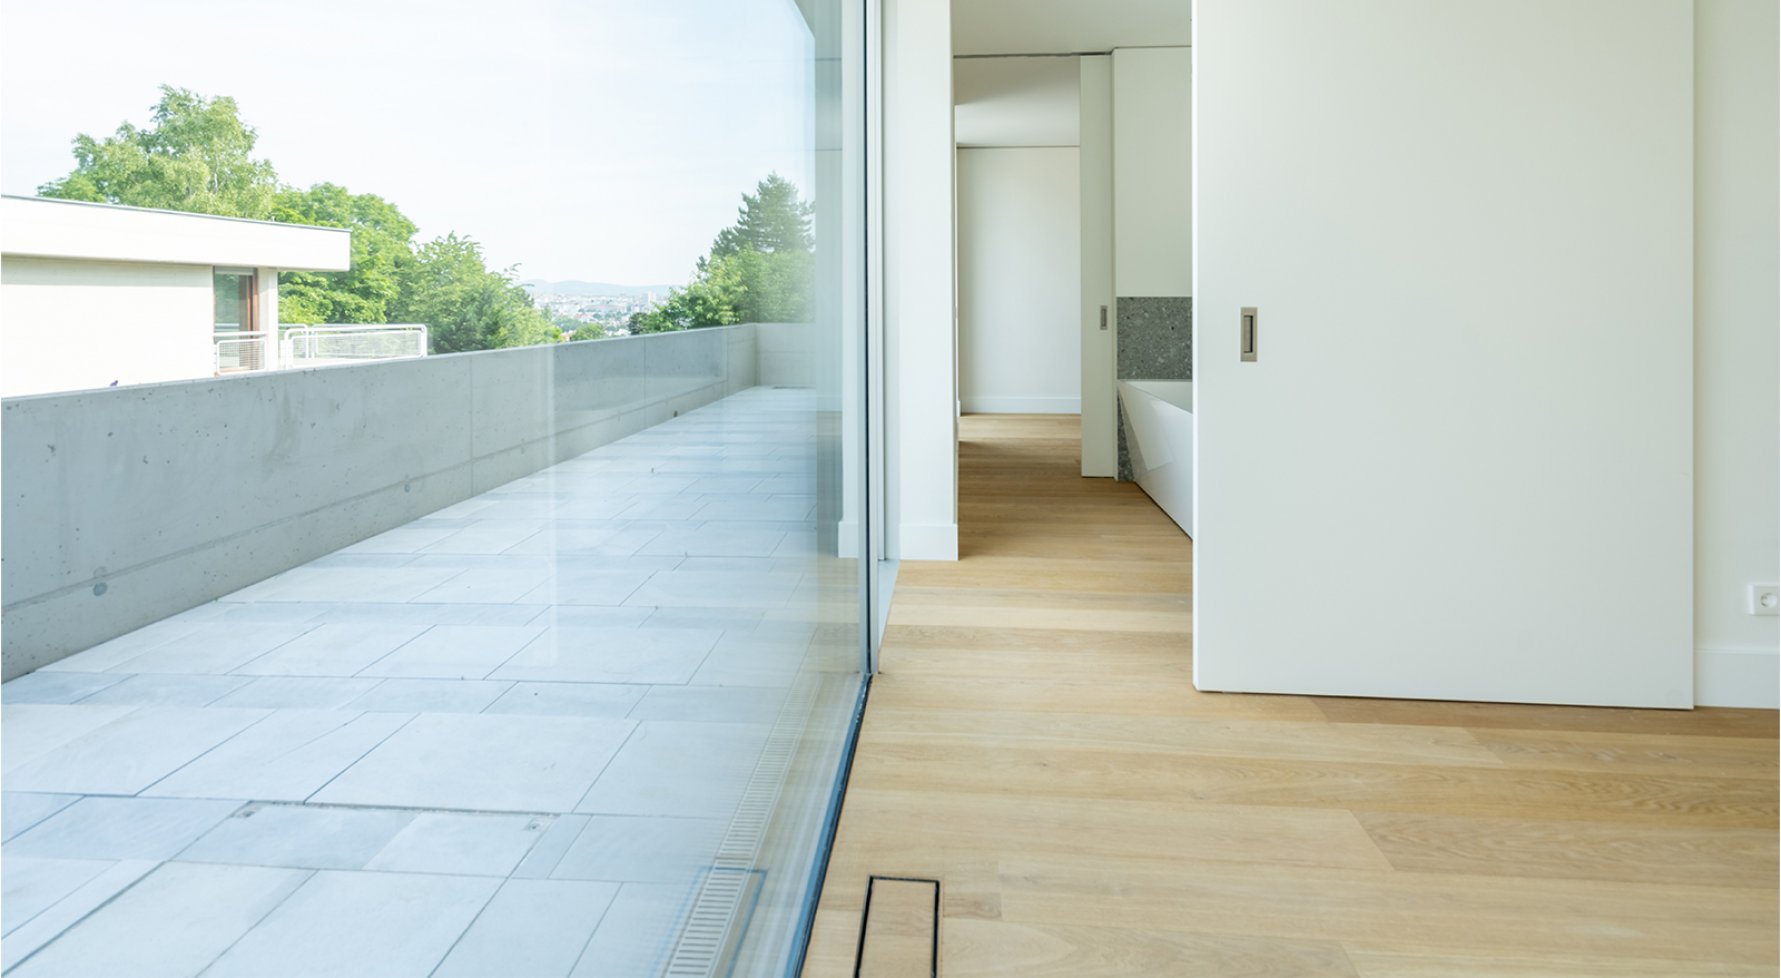 Property in 1130 Wien, 13. Bezirk: Chipperfield: Four-room designer flat in the heart of the 13th district - picture 1